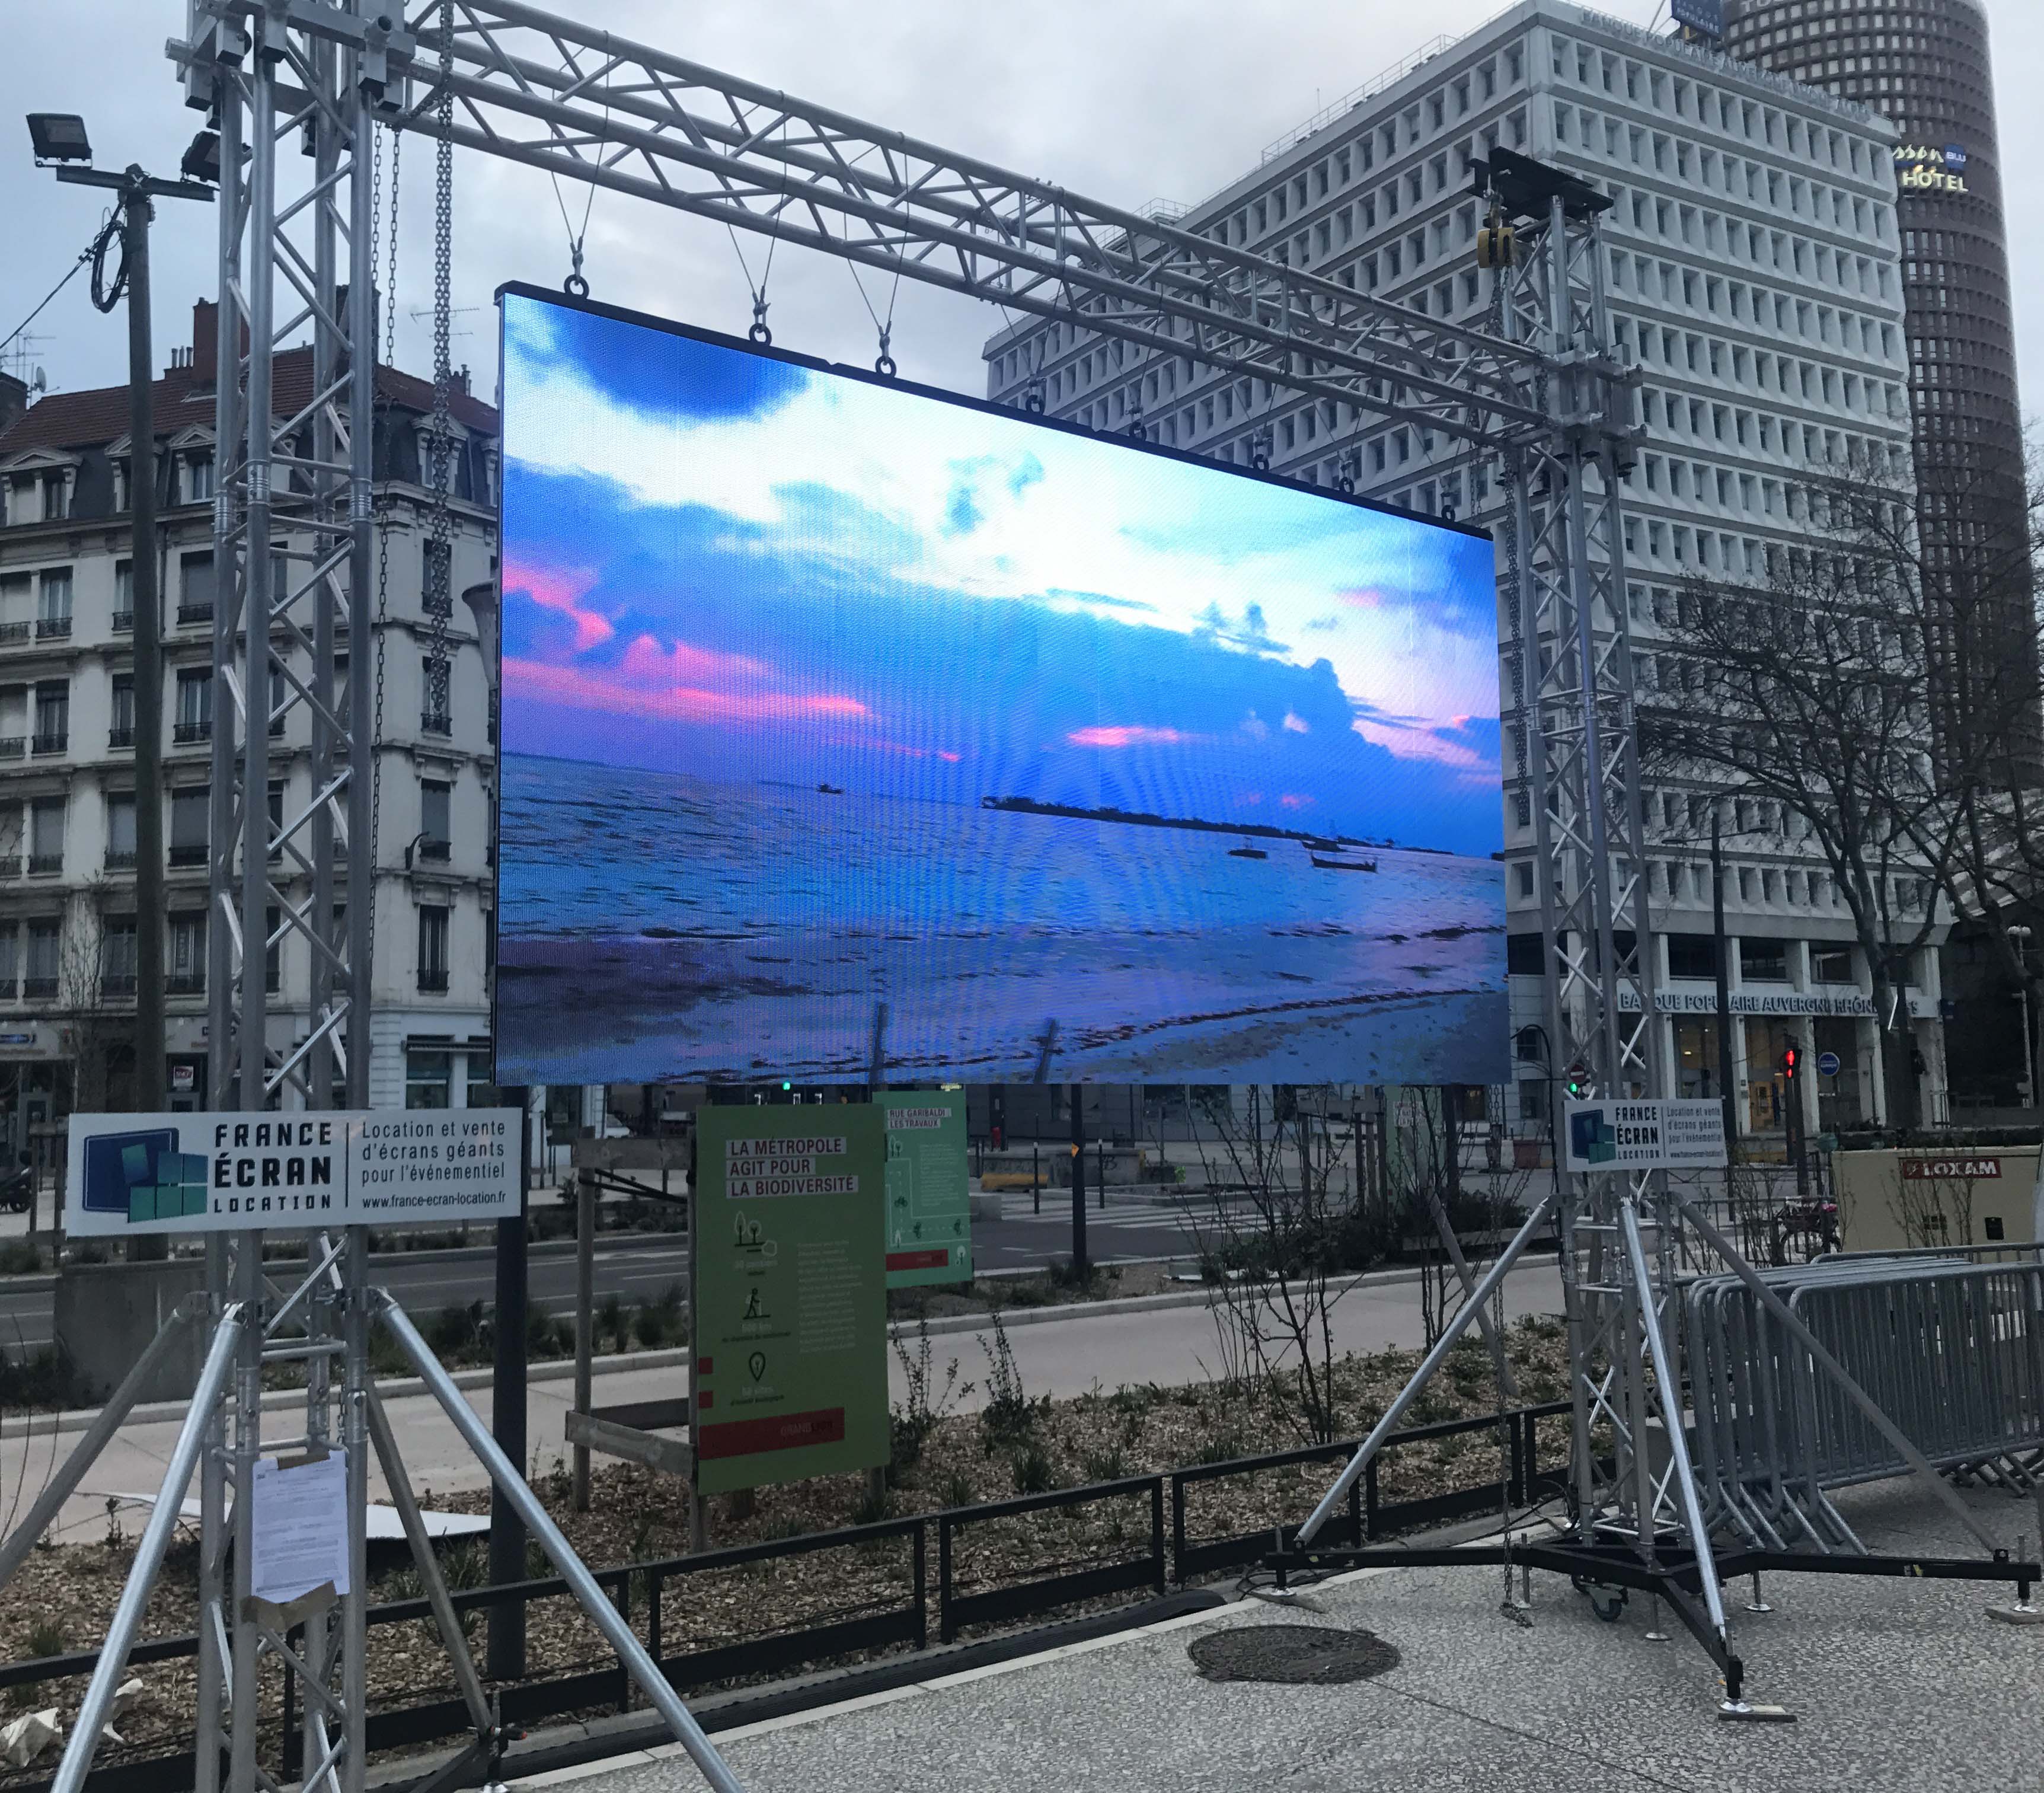 led advertising screen manufacturers